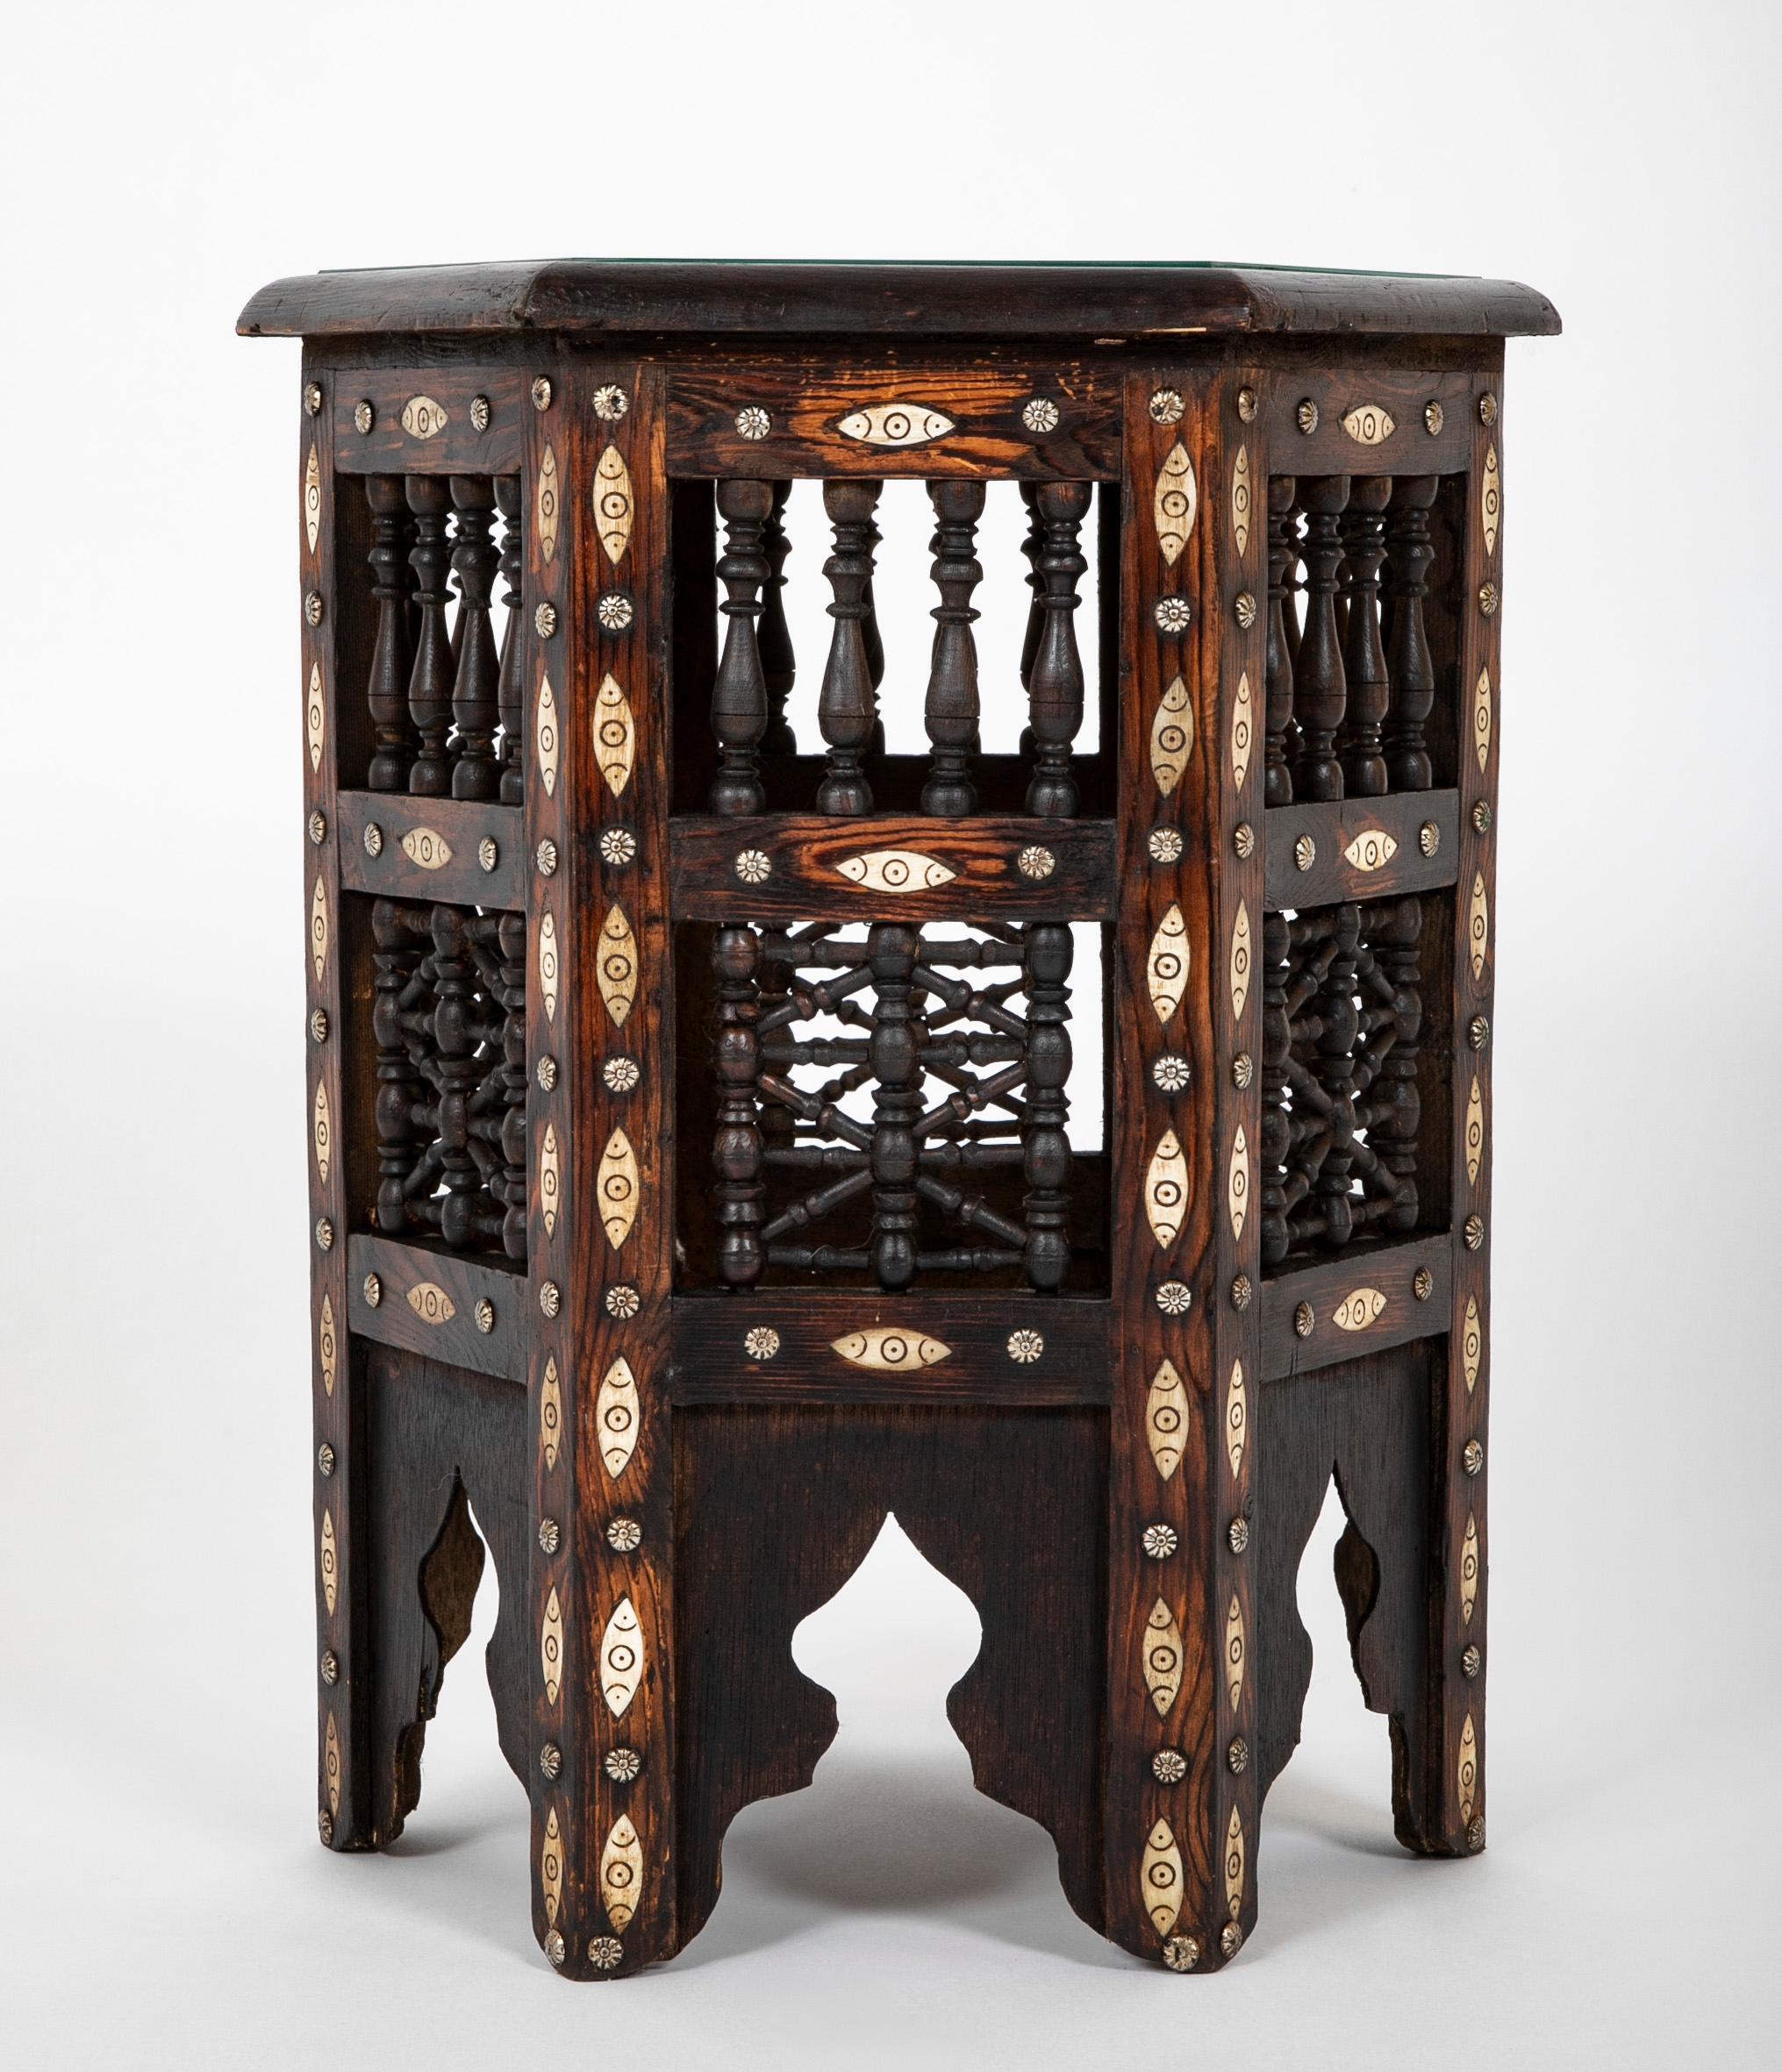 Moroccan six sided glass topped side table with incised bone inlay and nail heads, and signature decorative turned wood spindles throughout. Rich and warm patina, a very handsome side, end or drinks table. New, scratch free glass top. This Moorish